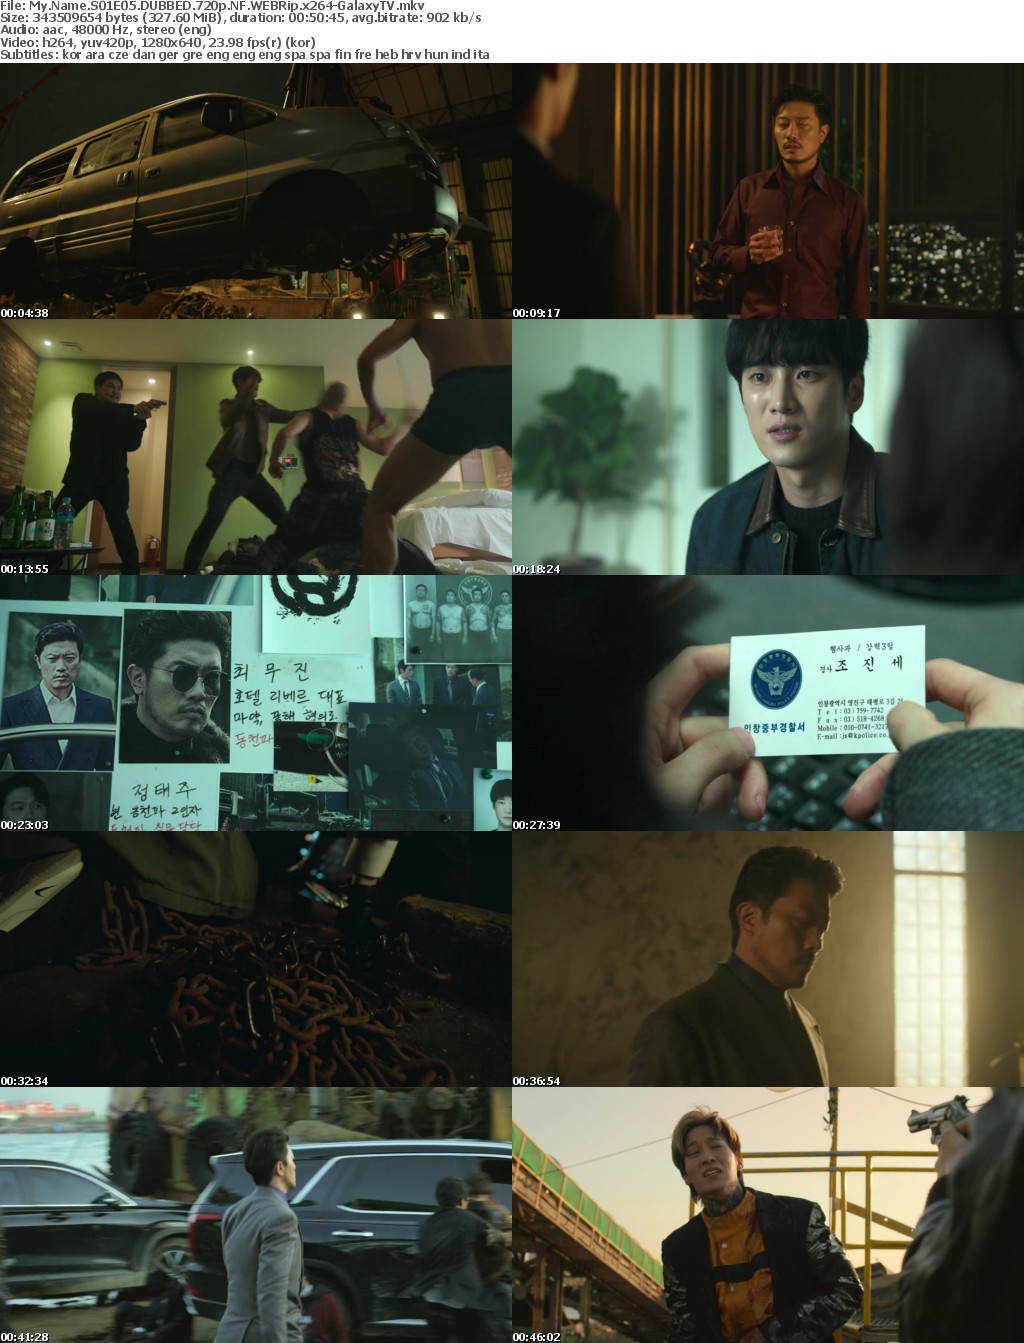 My Name S01 COMPLETE DUBBED 720p NF WEBRip x264-GalaxyTV